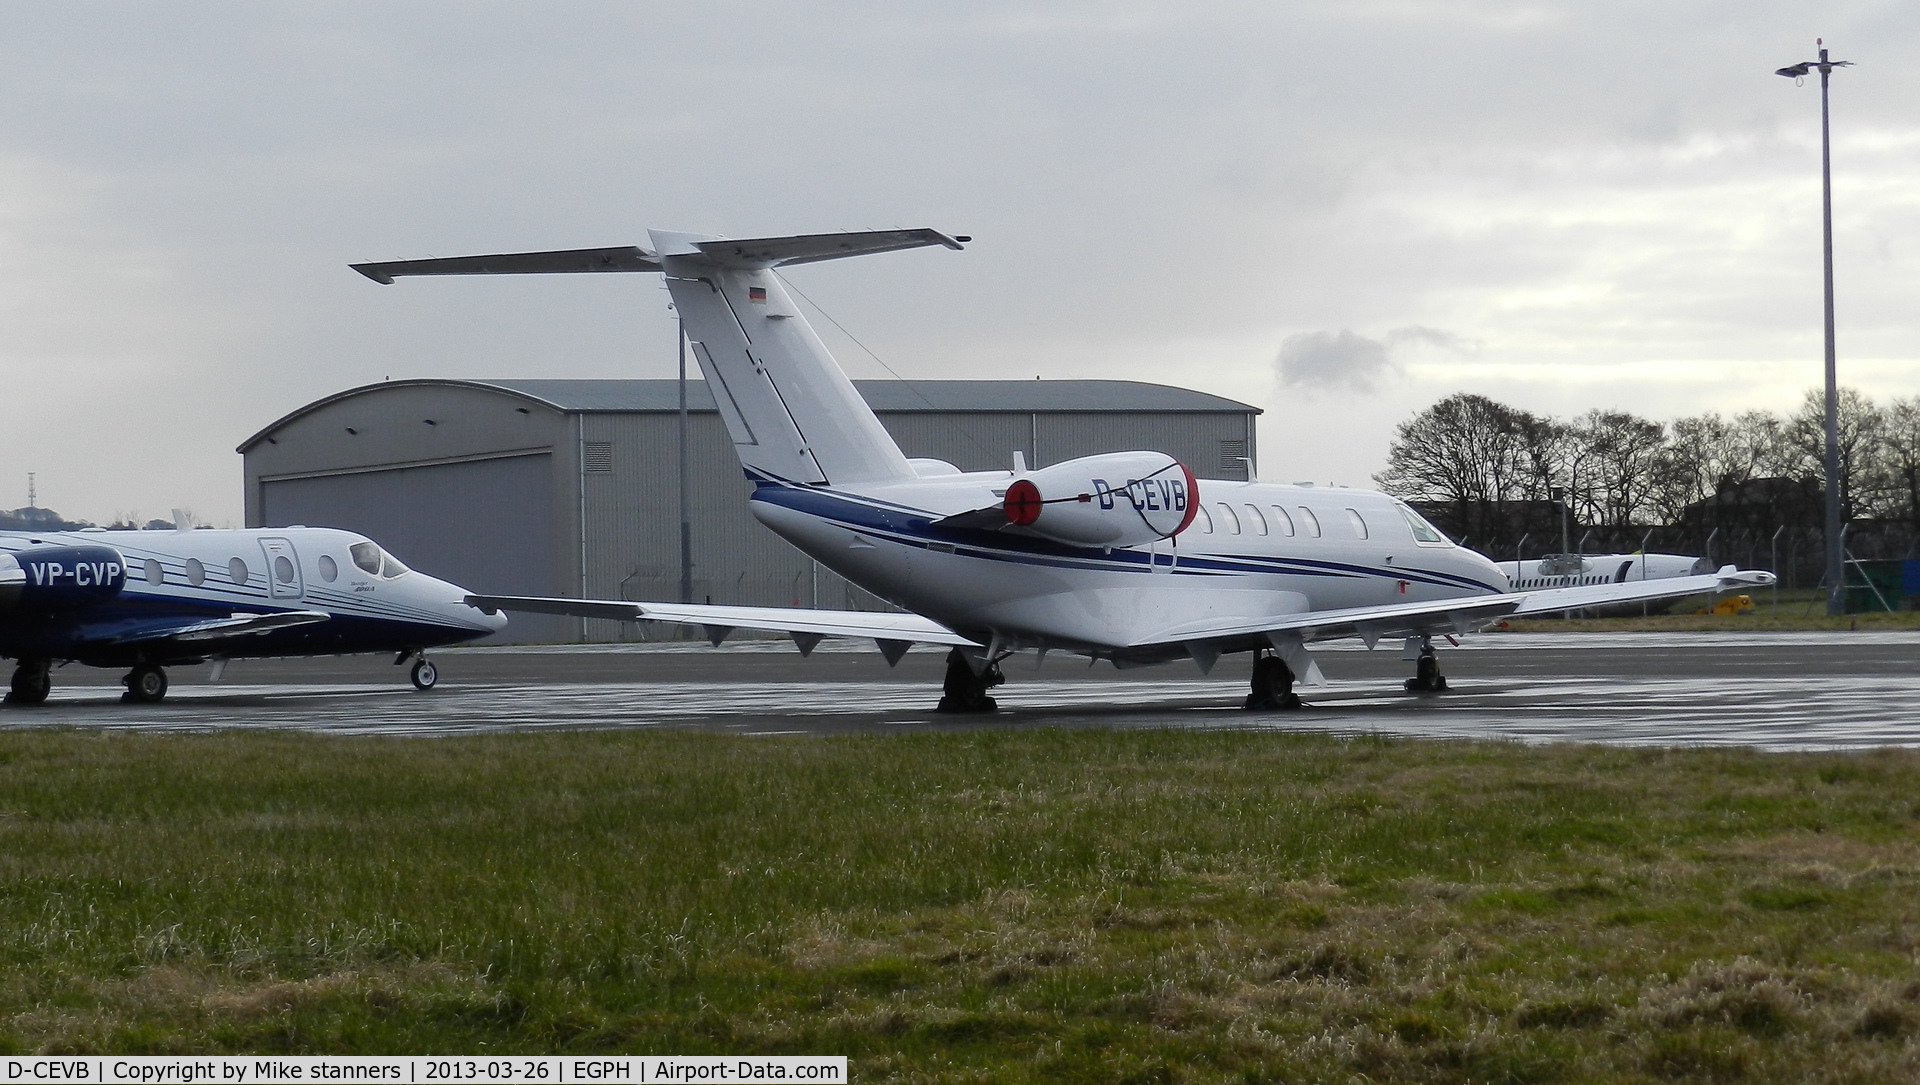 D-CEVB, 2011 Cessna 525C CitationJet CJ4 C/N 525C-0043, first pic in the database